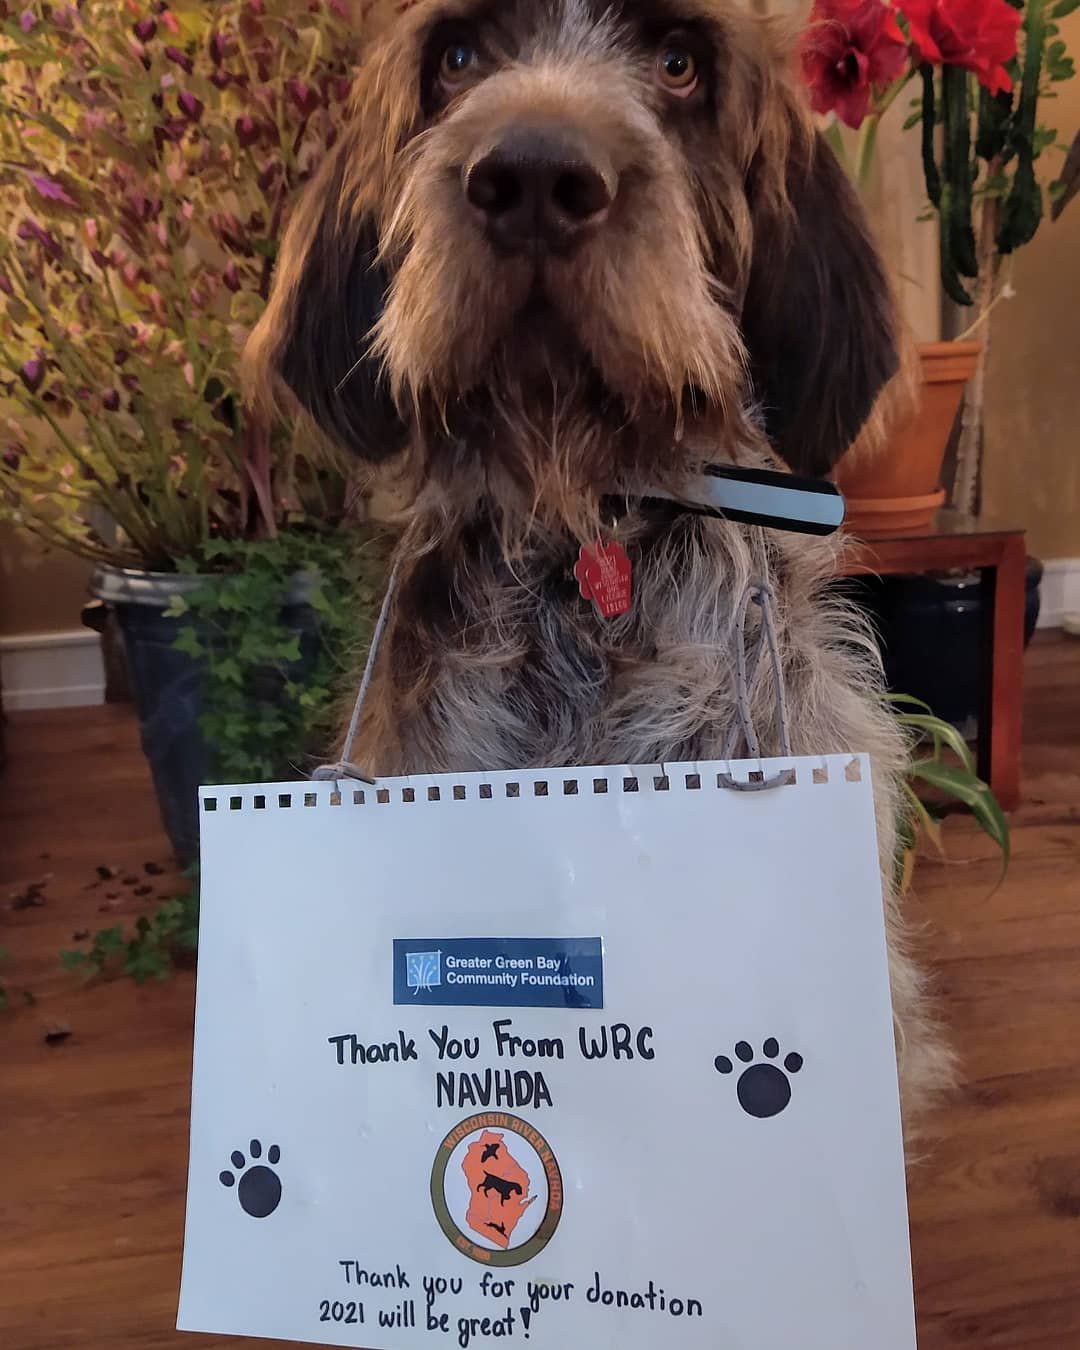 We are pleased to announce that the Greater Green Bay Community Foundation awarded a $2,000 grant to the Wisconsin River Chapter NAVHDA. WRC Secretary Mike Murray's Spinone &quot;Titan&quot; is especially thankful.

&nbsp;

This donation specifically